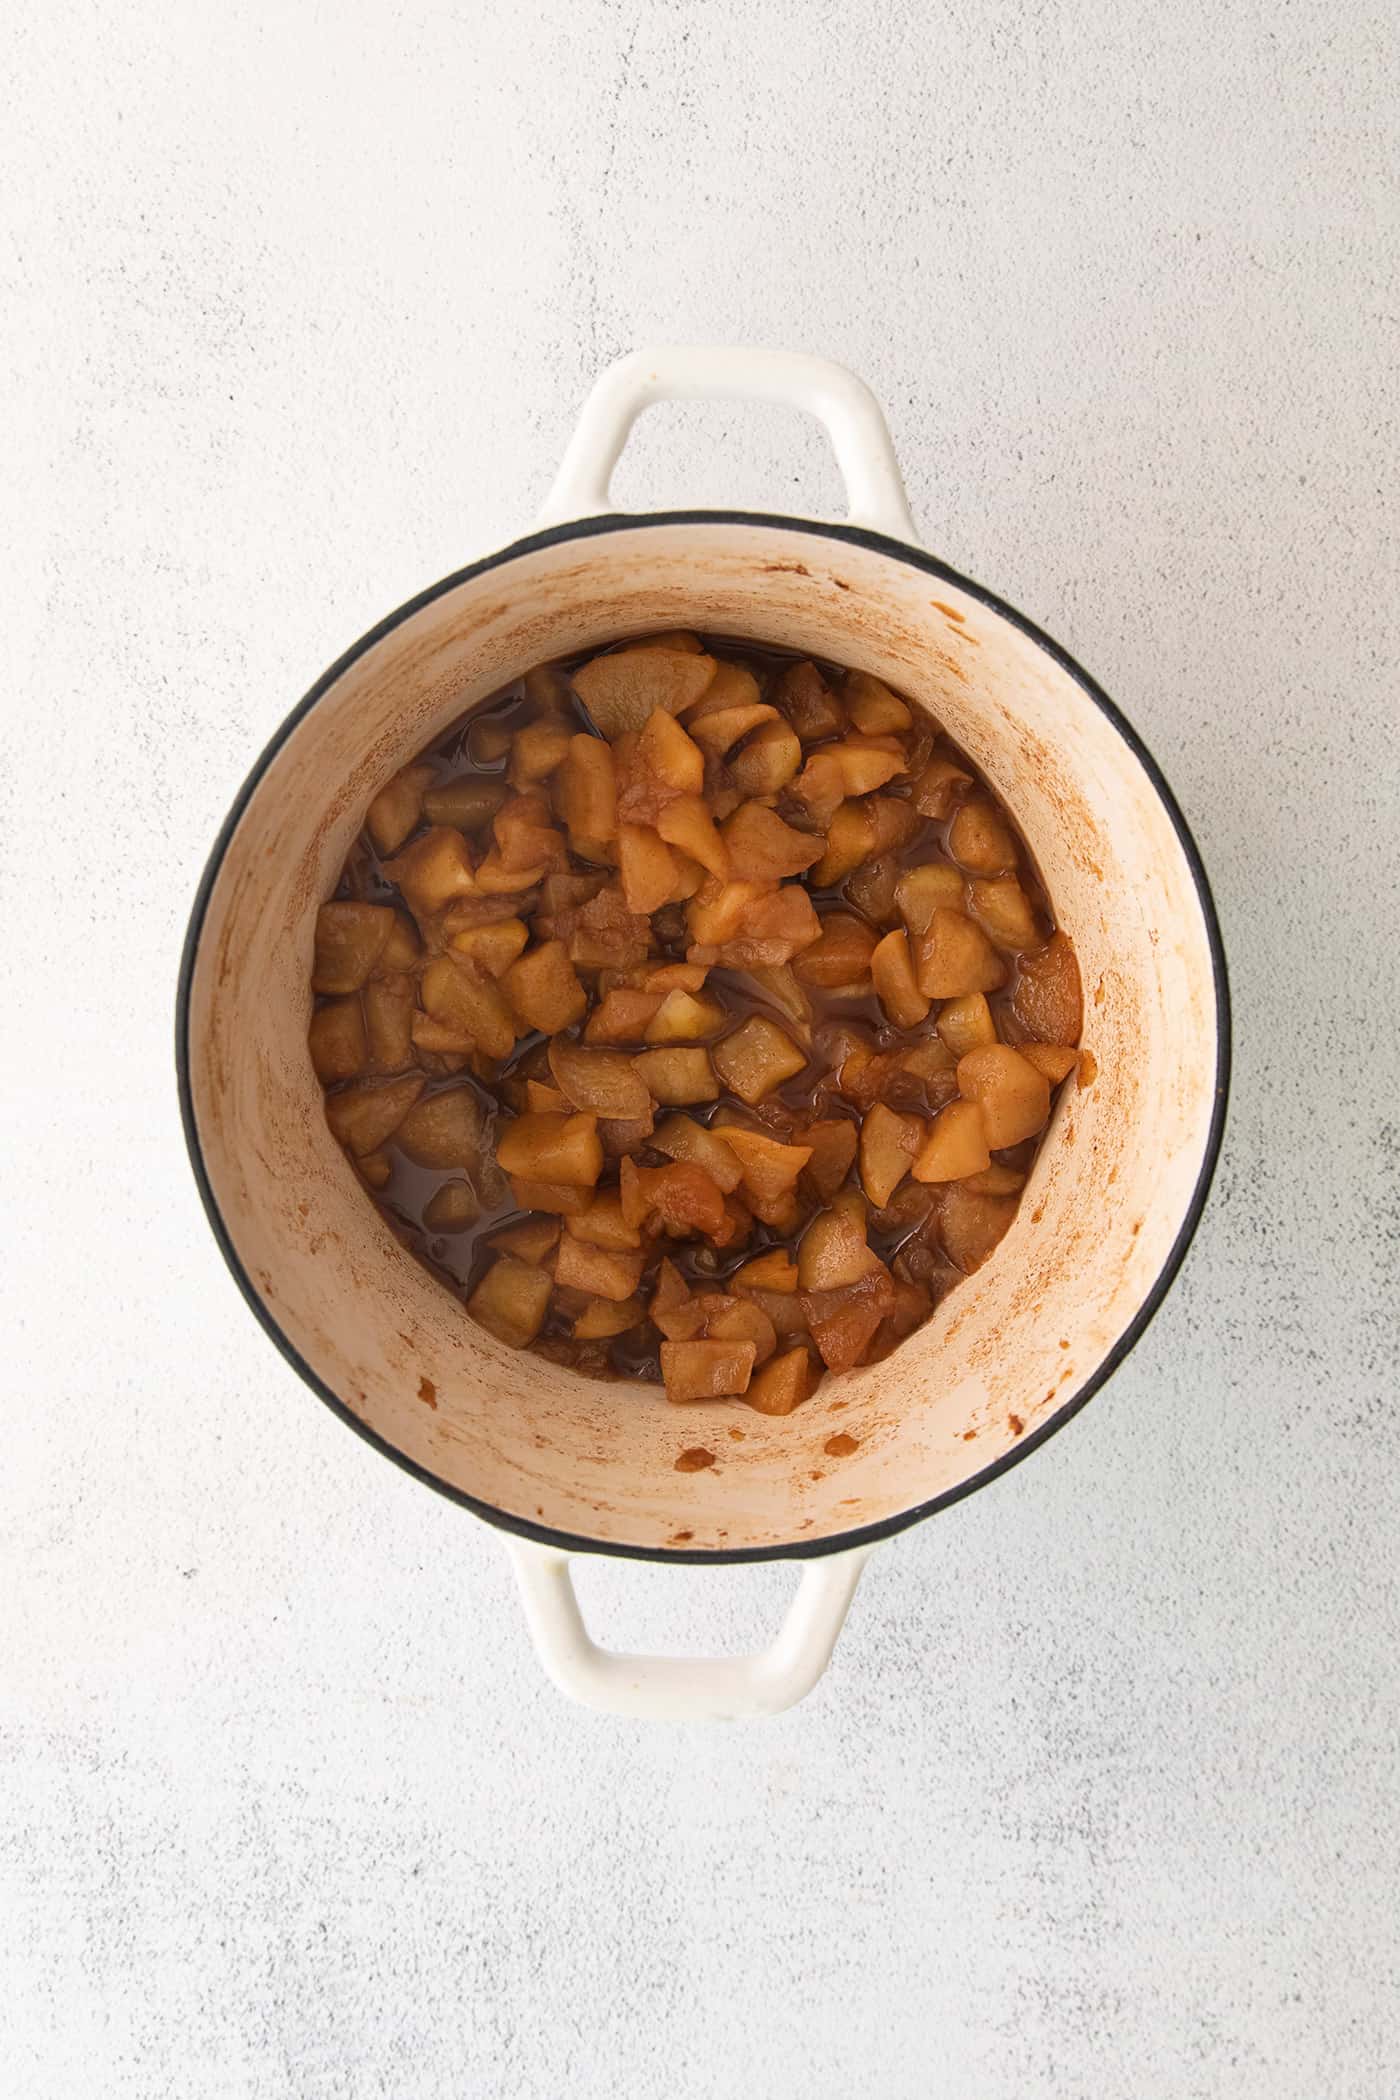 chopped apples cooked and softened in a large white pot